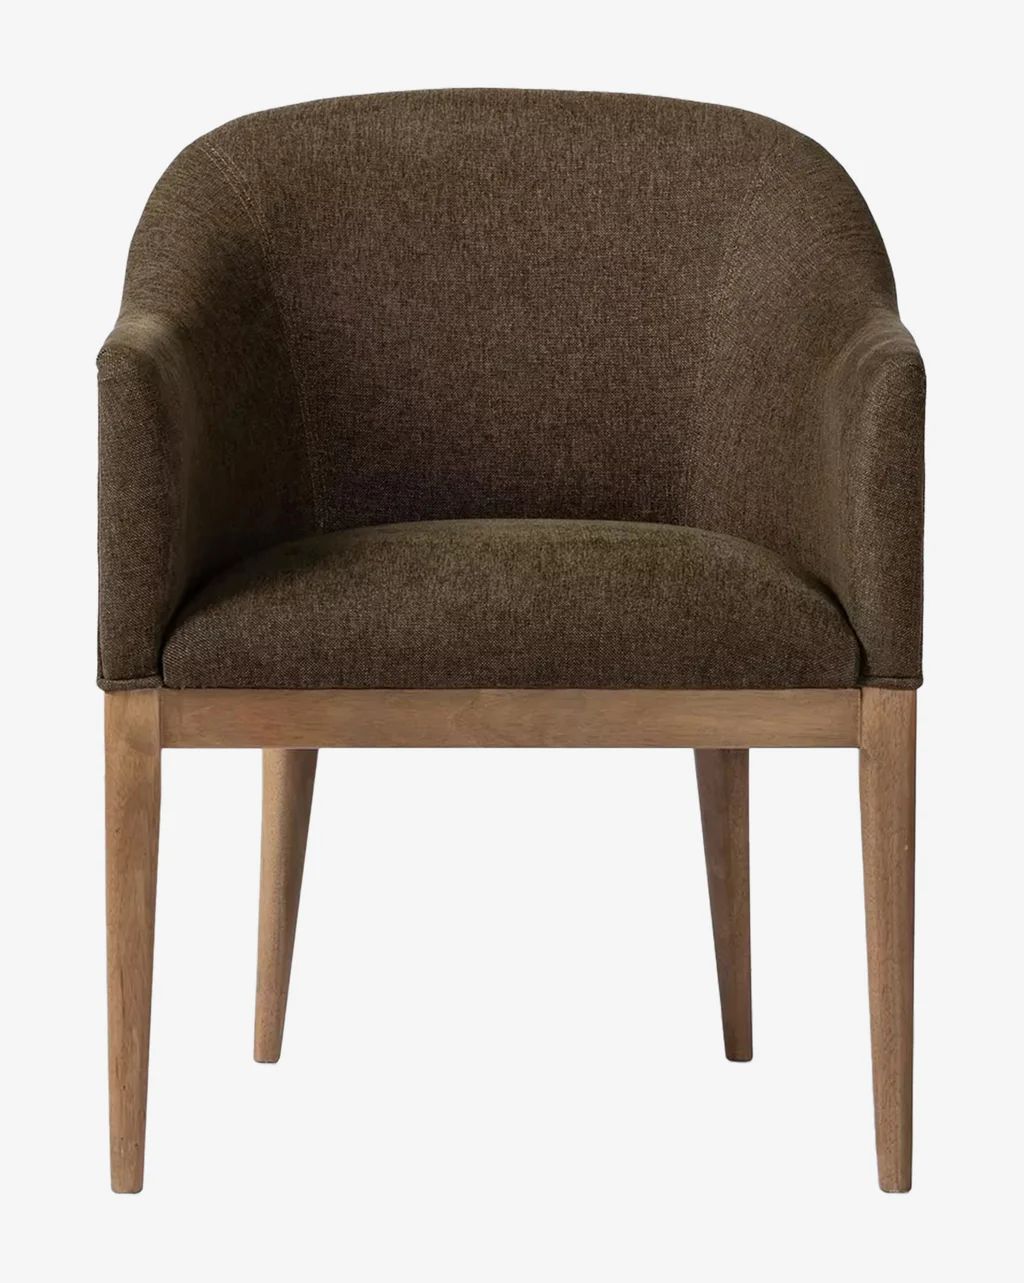 Paulette Chair | McGee & Co. (US)